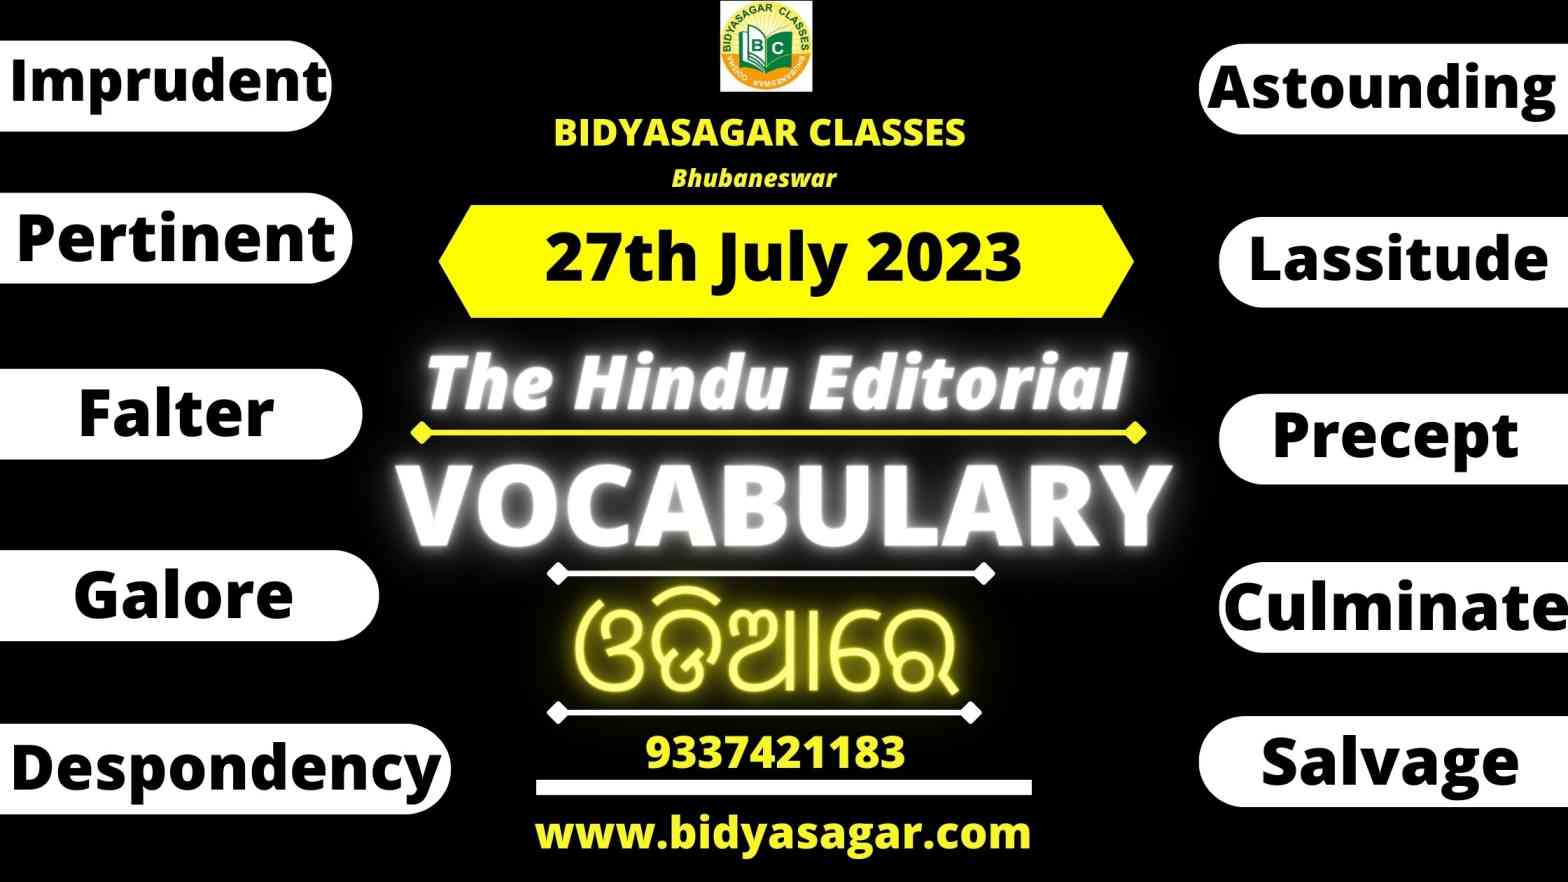 The Hindu Editorial Vocabulary of 27th July 2023